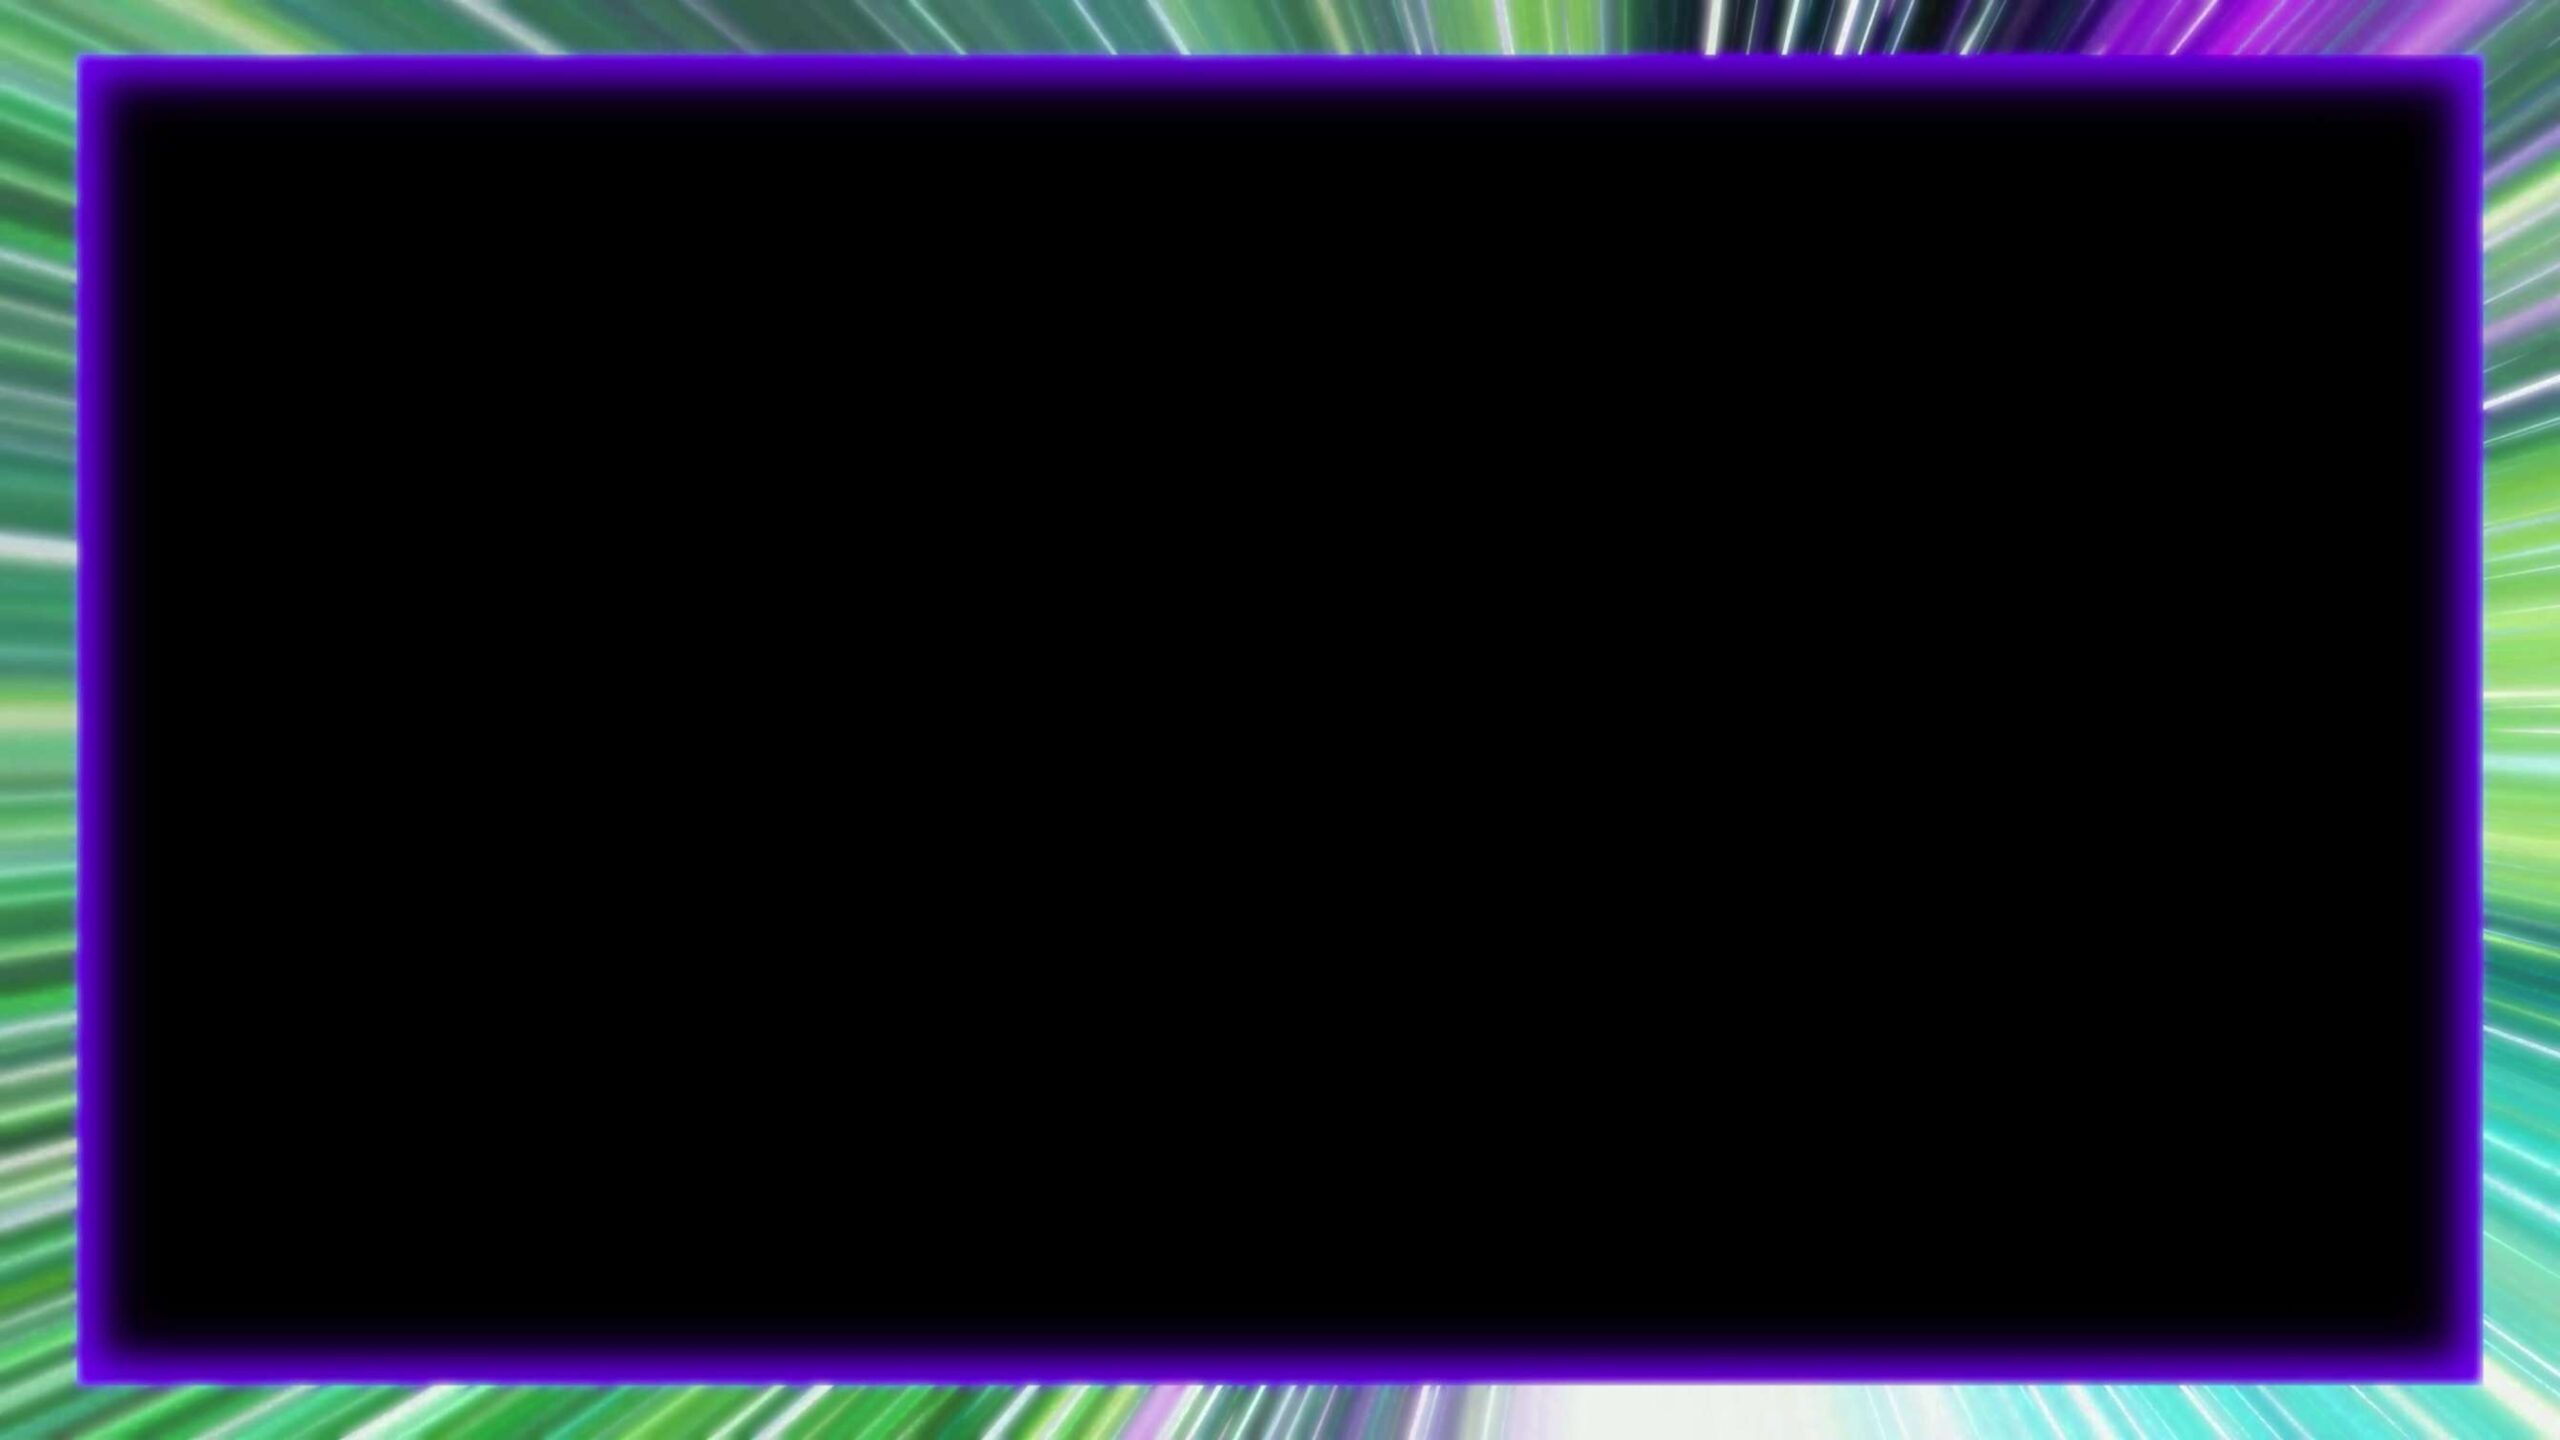 4K Colorful Borders Looped Overlay Effect Free Download || Overlay Effect For Editing